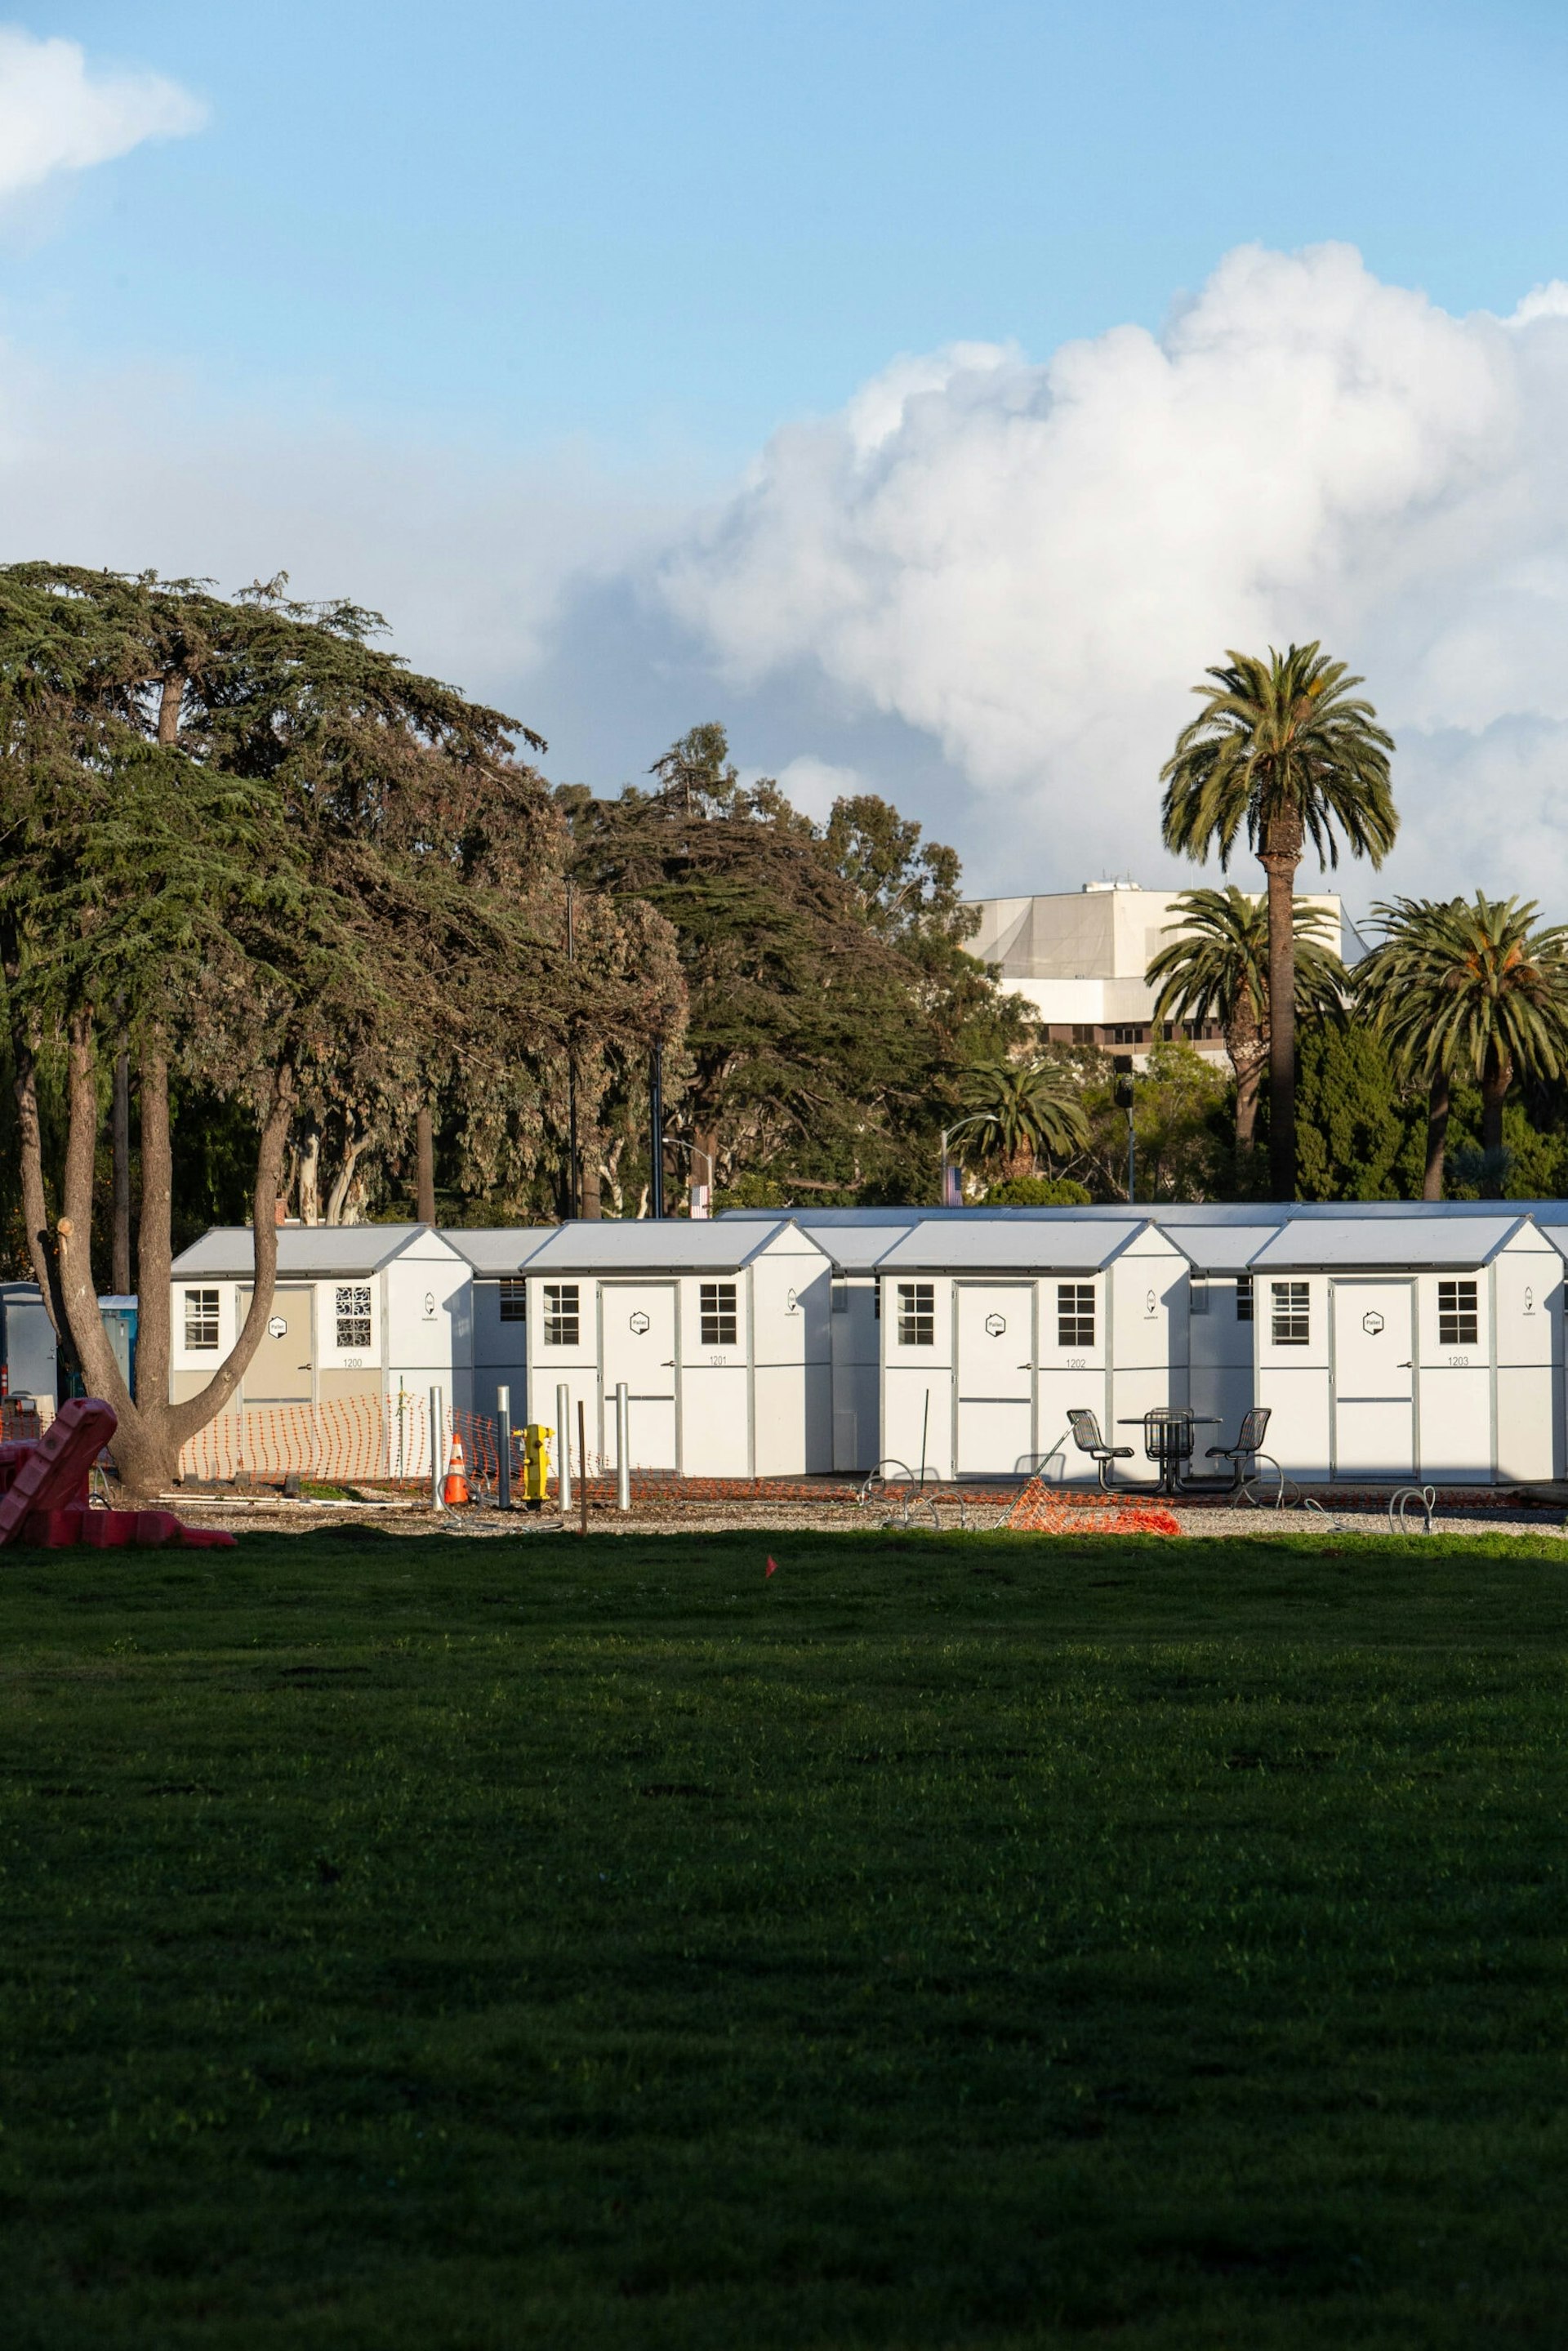 Rows of sheds are seen on the West Los Angeles VA campus.